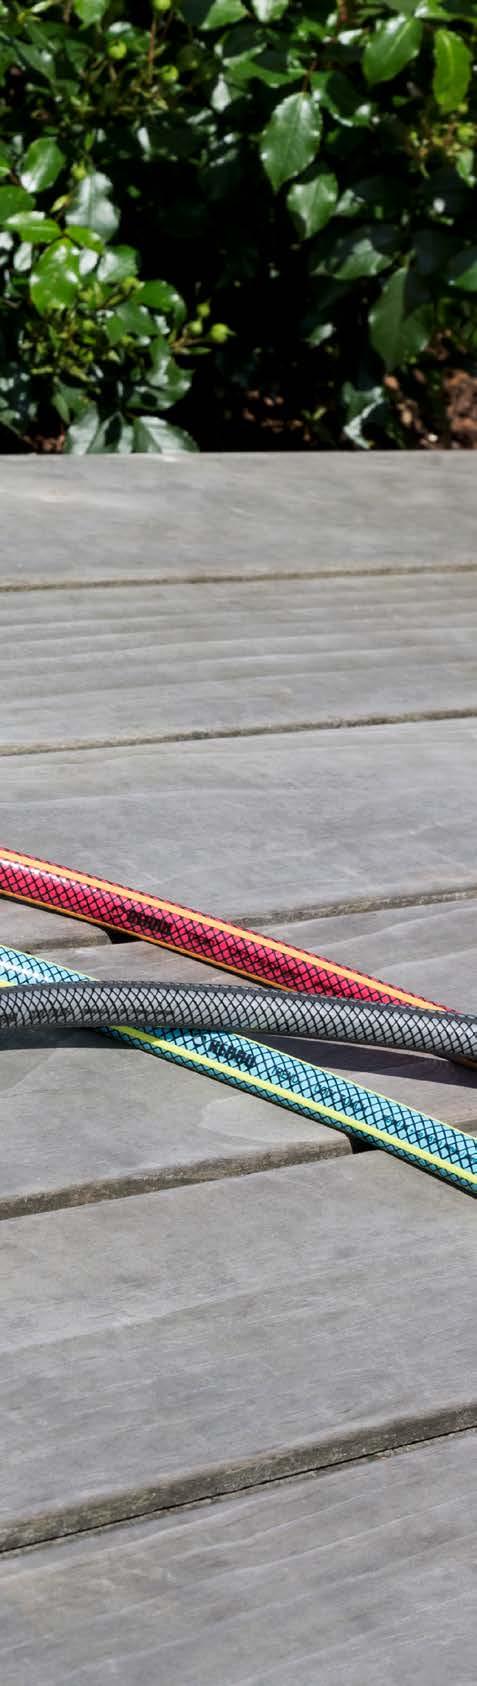 GARDEN HOSES TREND TREND garden hoses Always a step ahead Whether it is sustainability or completely new designs garden hoses of this category have something in common: they are different, new and